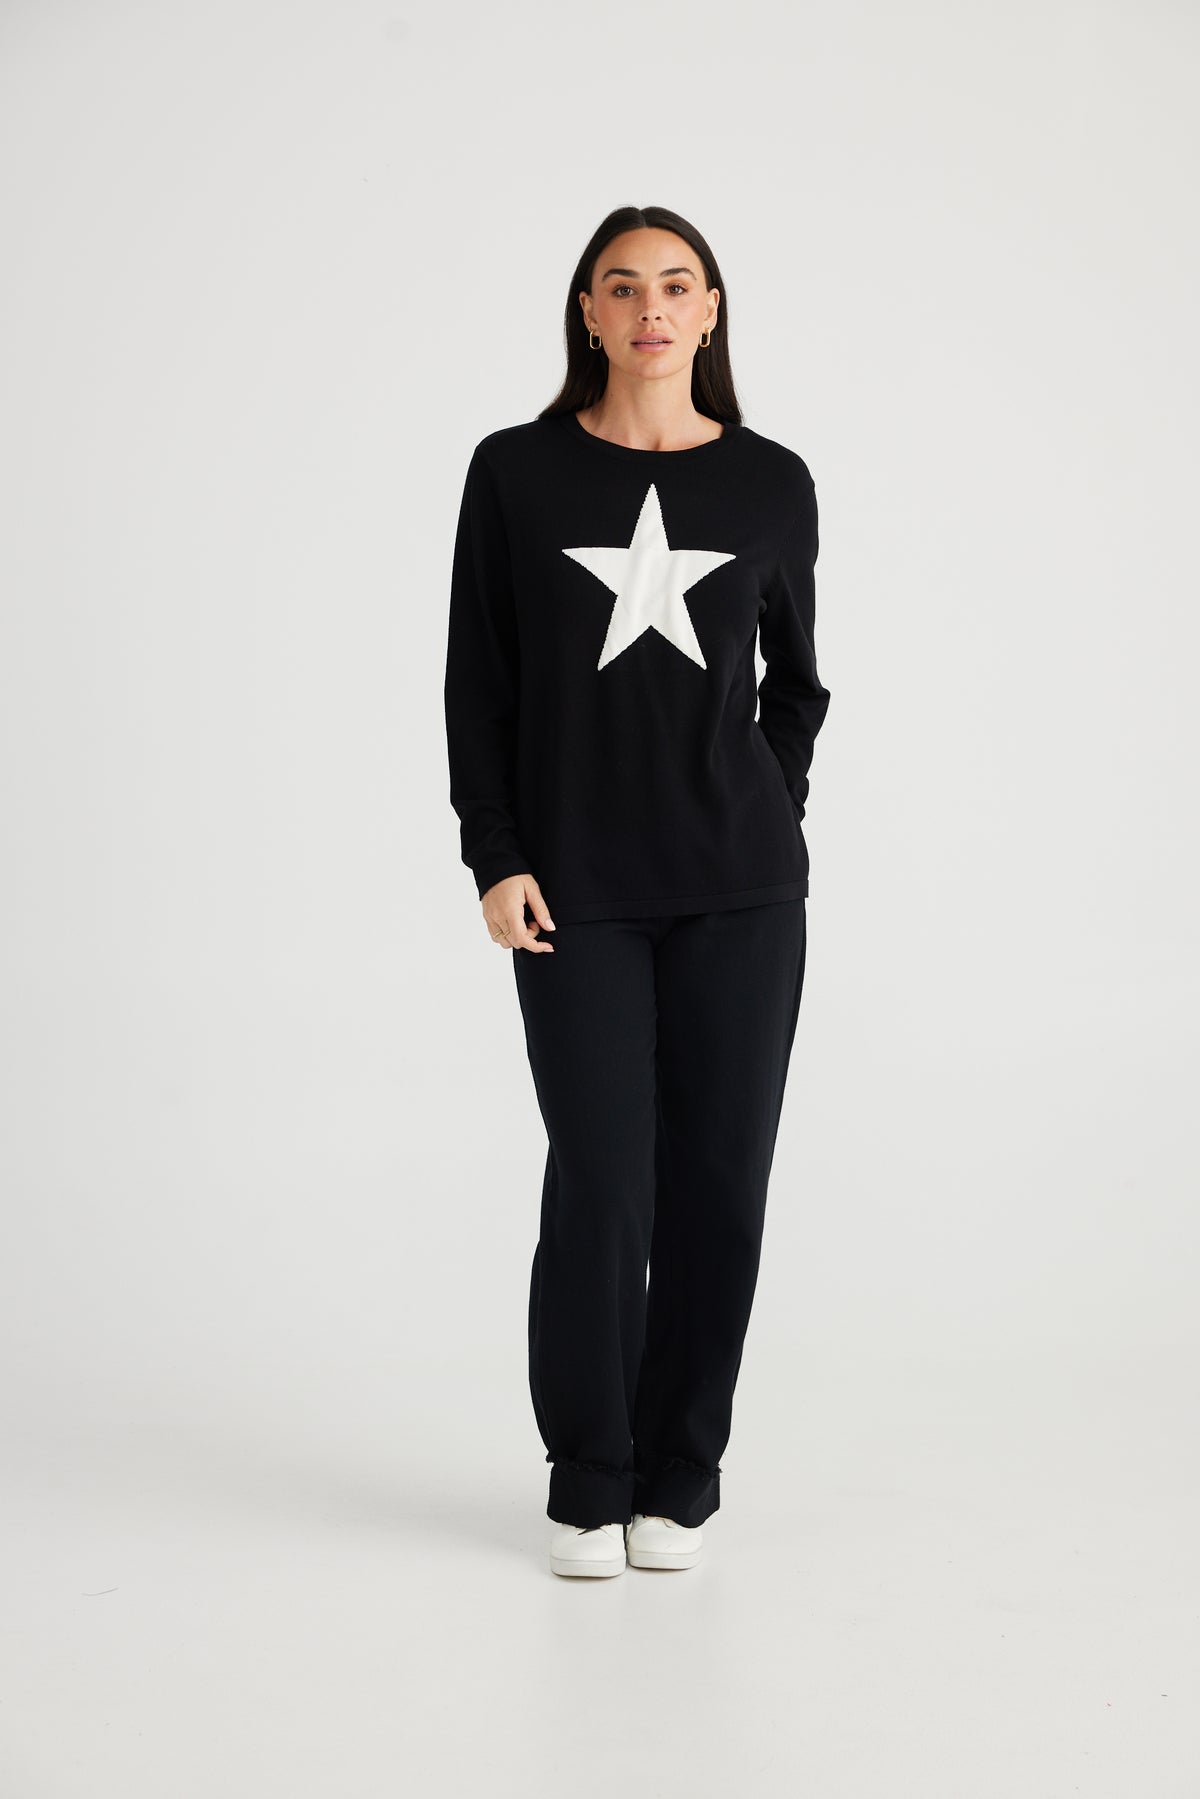 Petra Star Knit Black With White